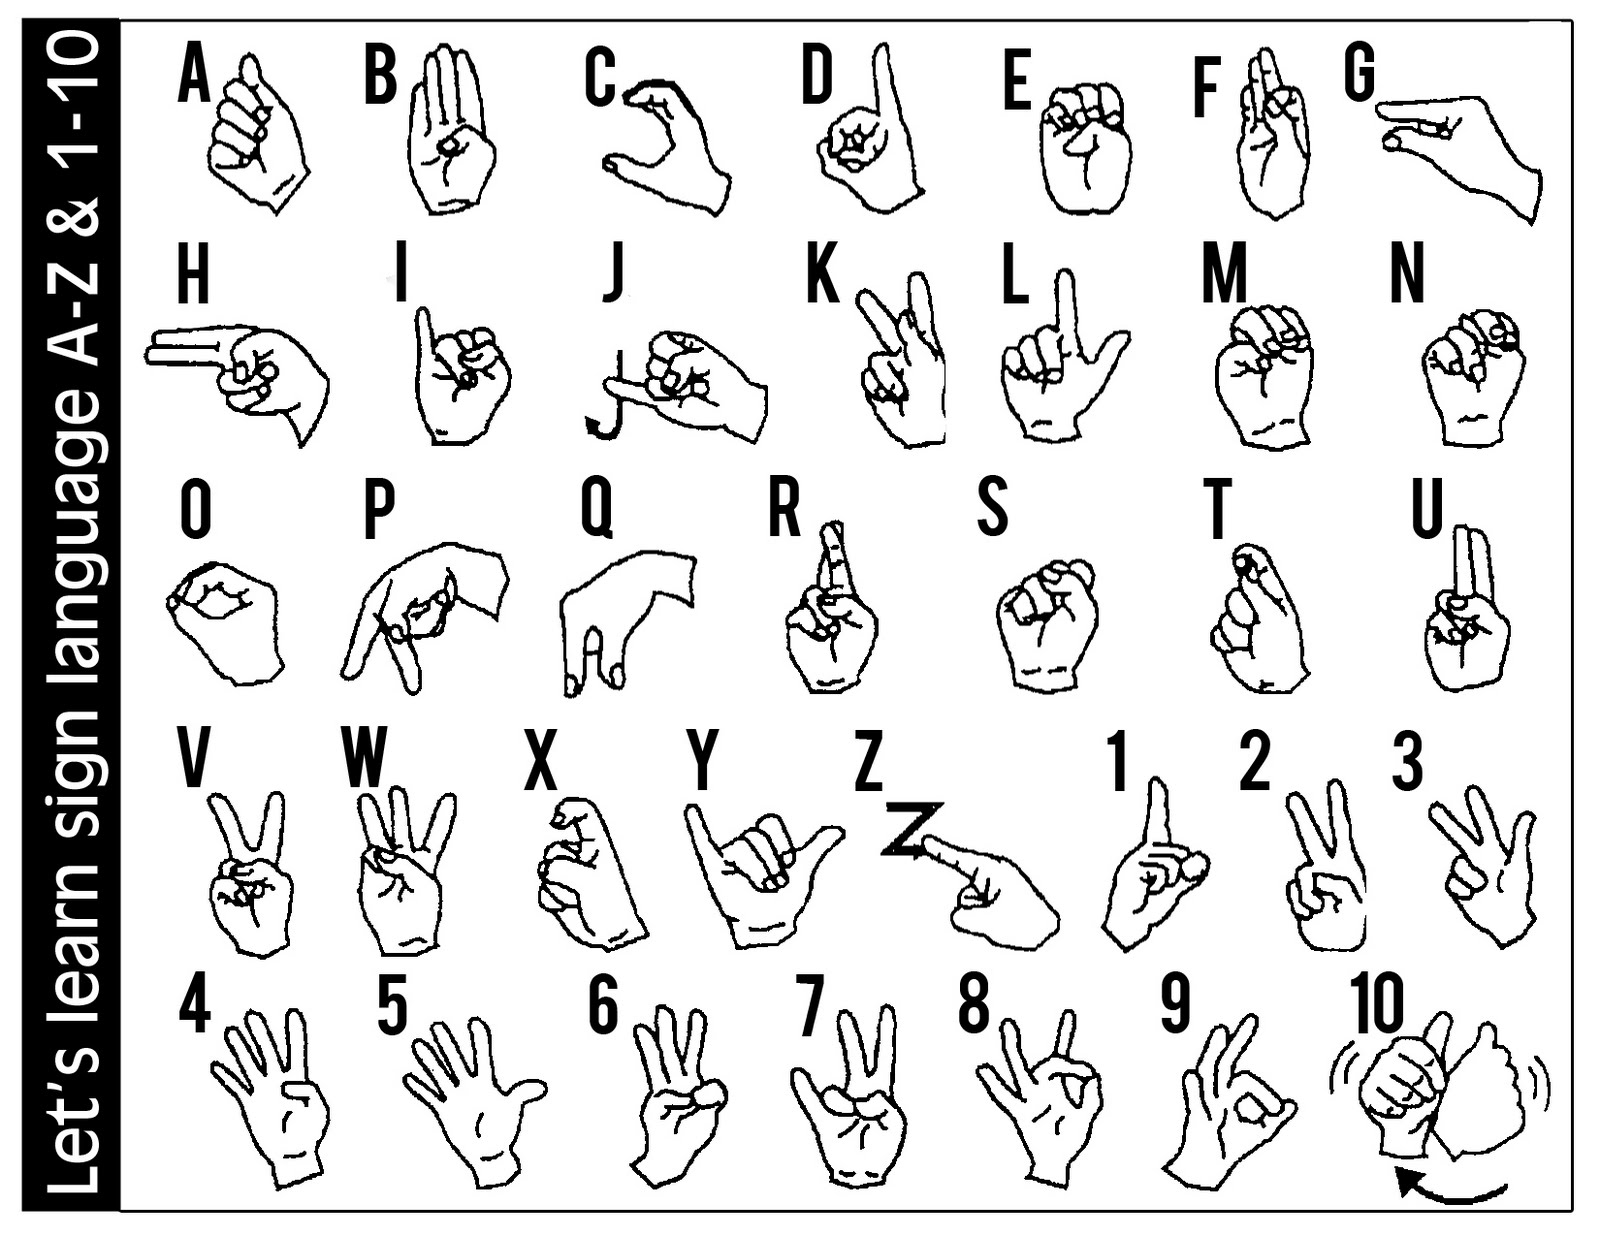 La Salle University Ozamiz School For The Deaf Communicate Without Borders Learn Sign Language